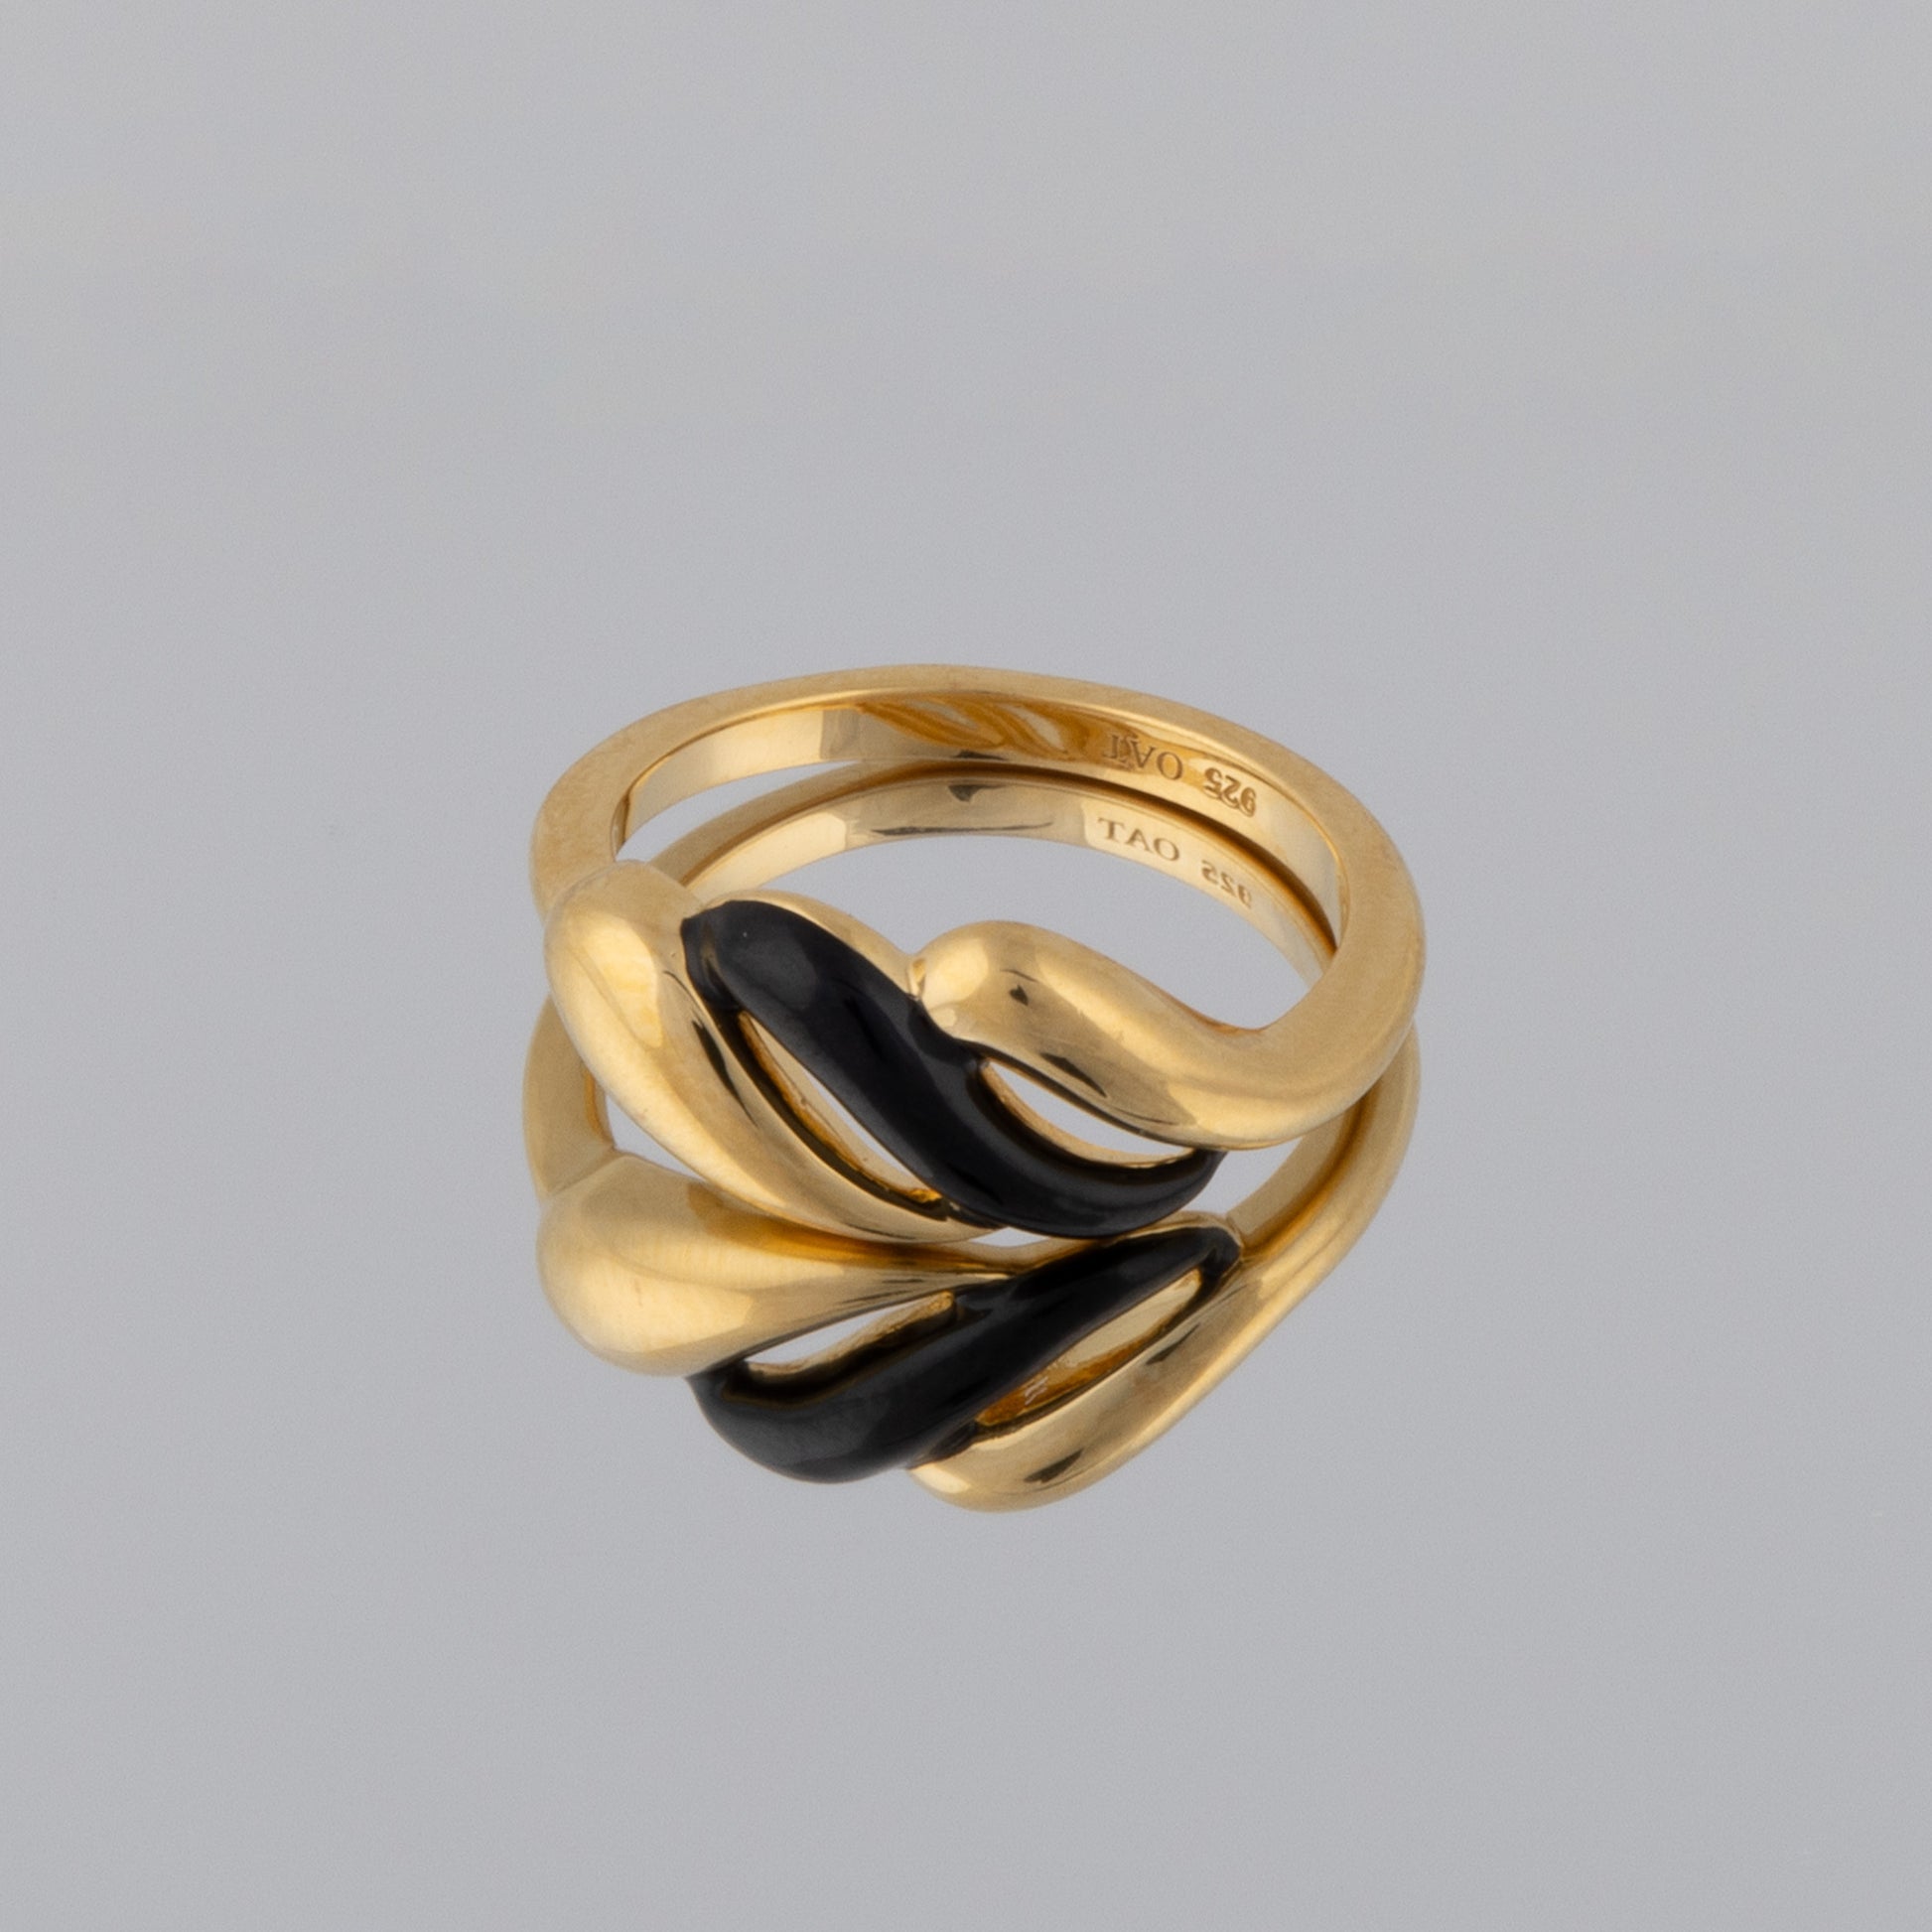 Gold Vermeil and Black Enamel Ring with Wave Design